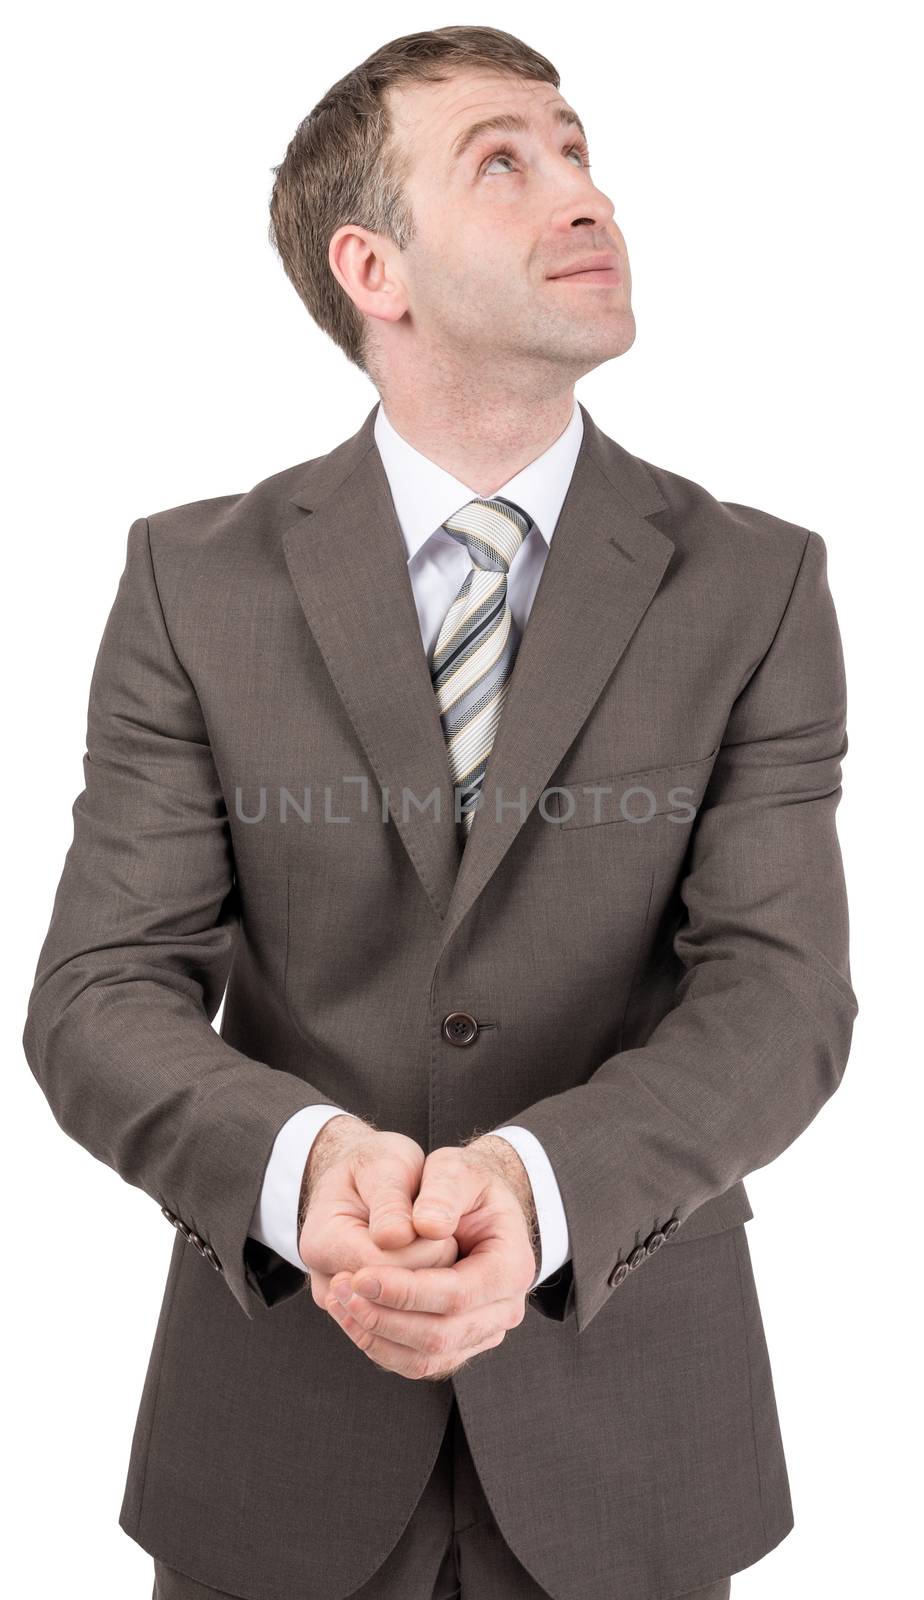 Smiling businessman holding hands in front of him and looks up to side